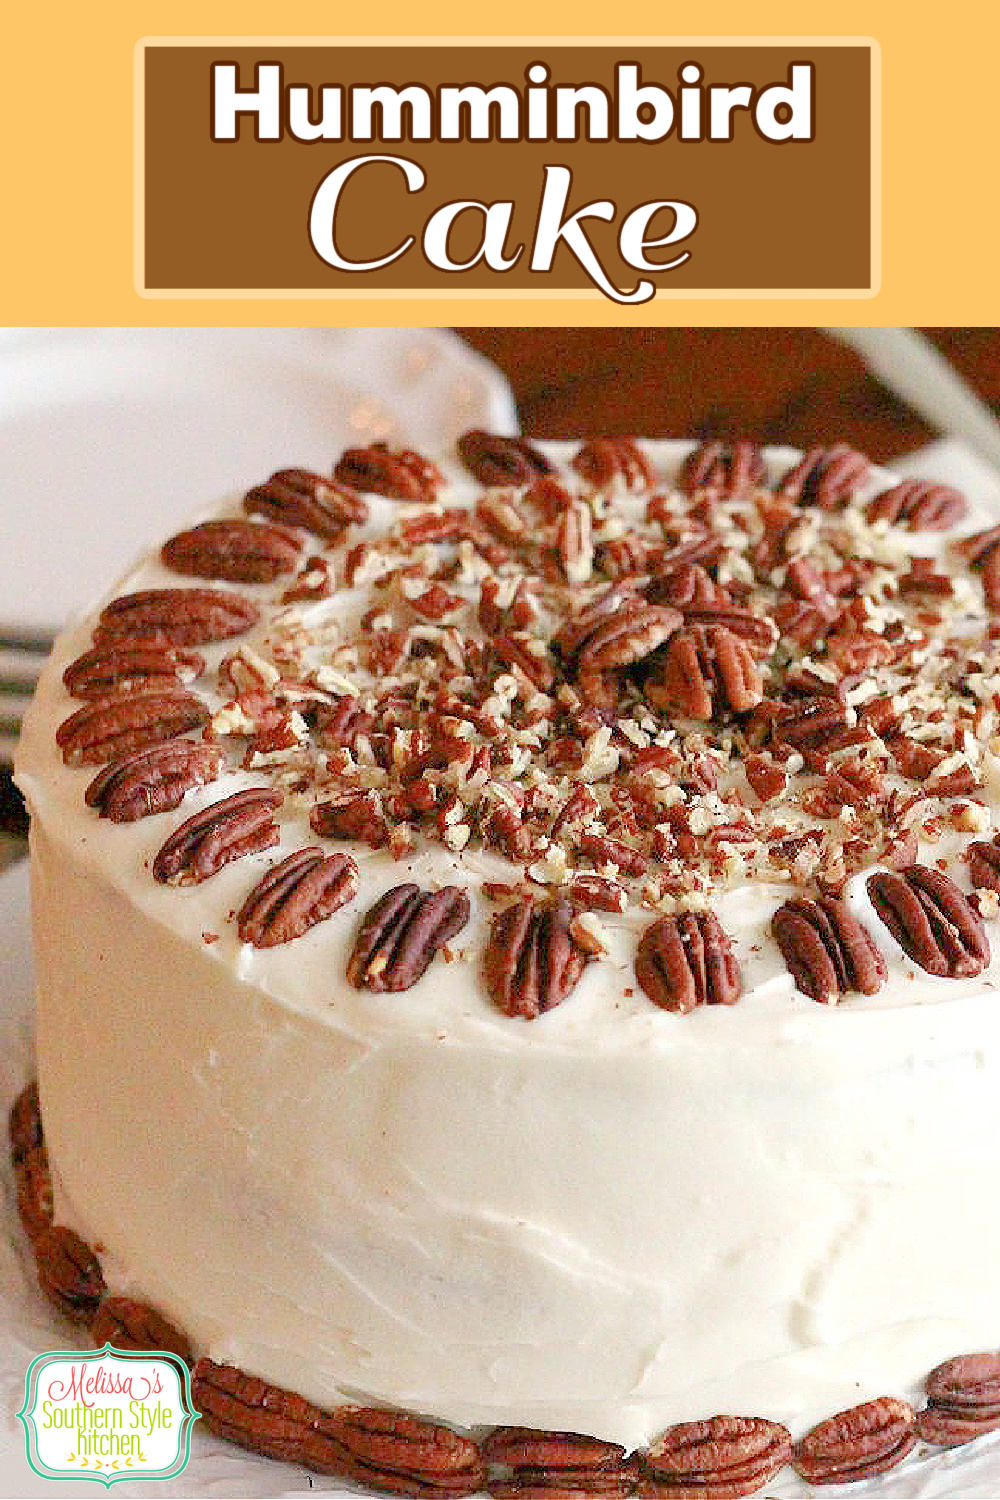 This Southern classic Hummingbird Cake never disappoints #hummingbirdcake #cakesrecipes #southerncakes #desserts #dessertfoodrecipes #pineapple #pecans #layercake #cake #holidayrecipes #holidays #southernfood #southernrecipes